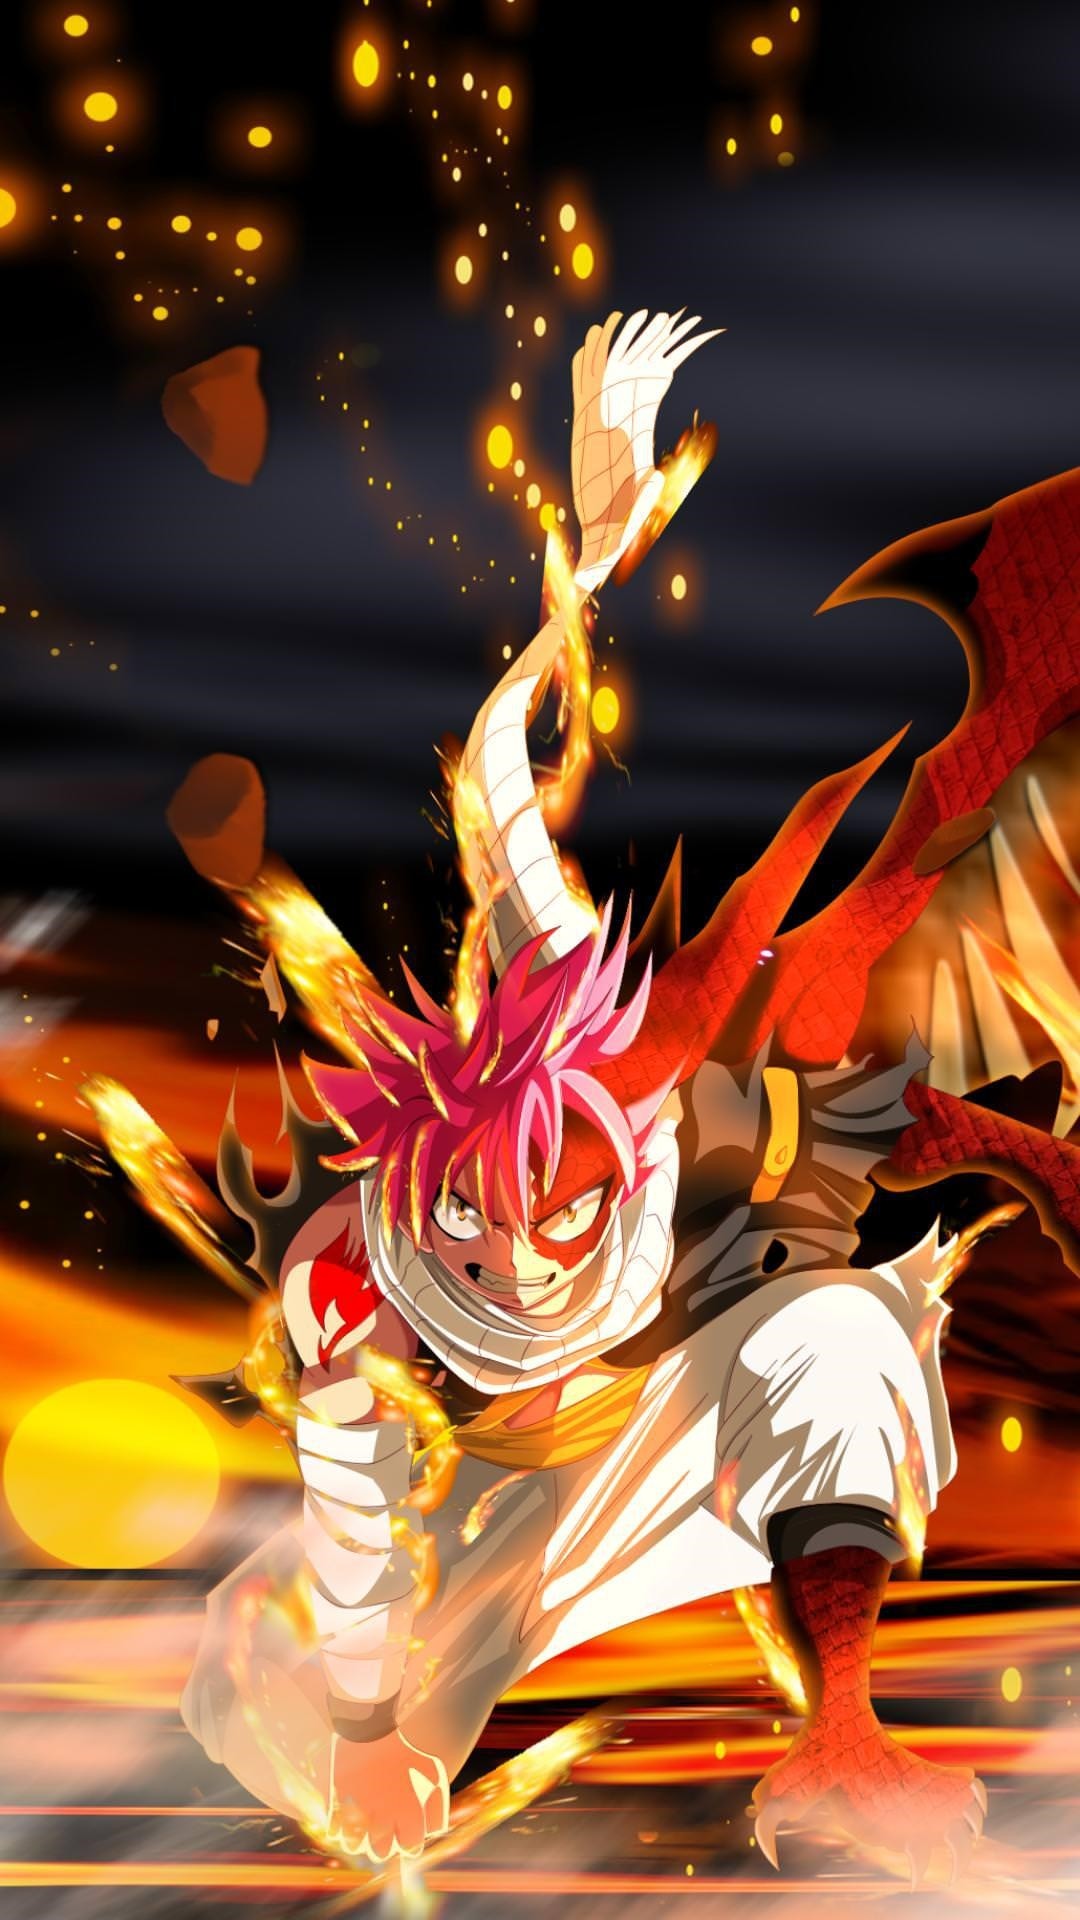 Fairy Tail iPhone wallpaper